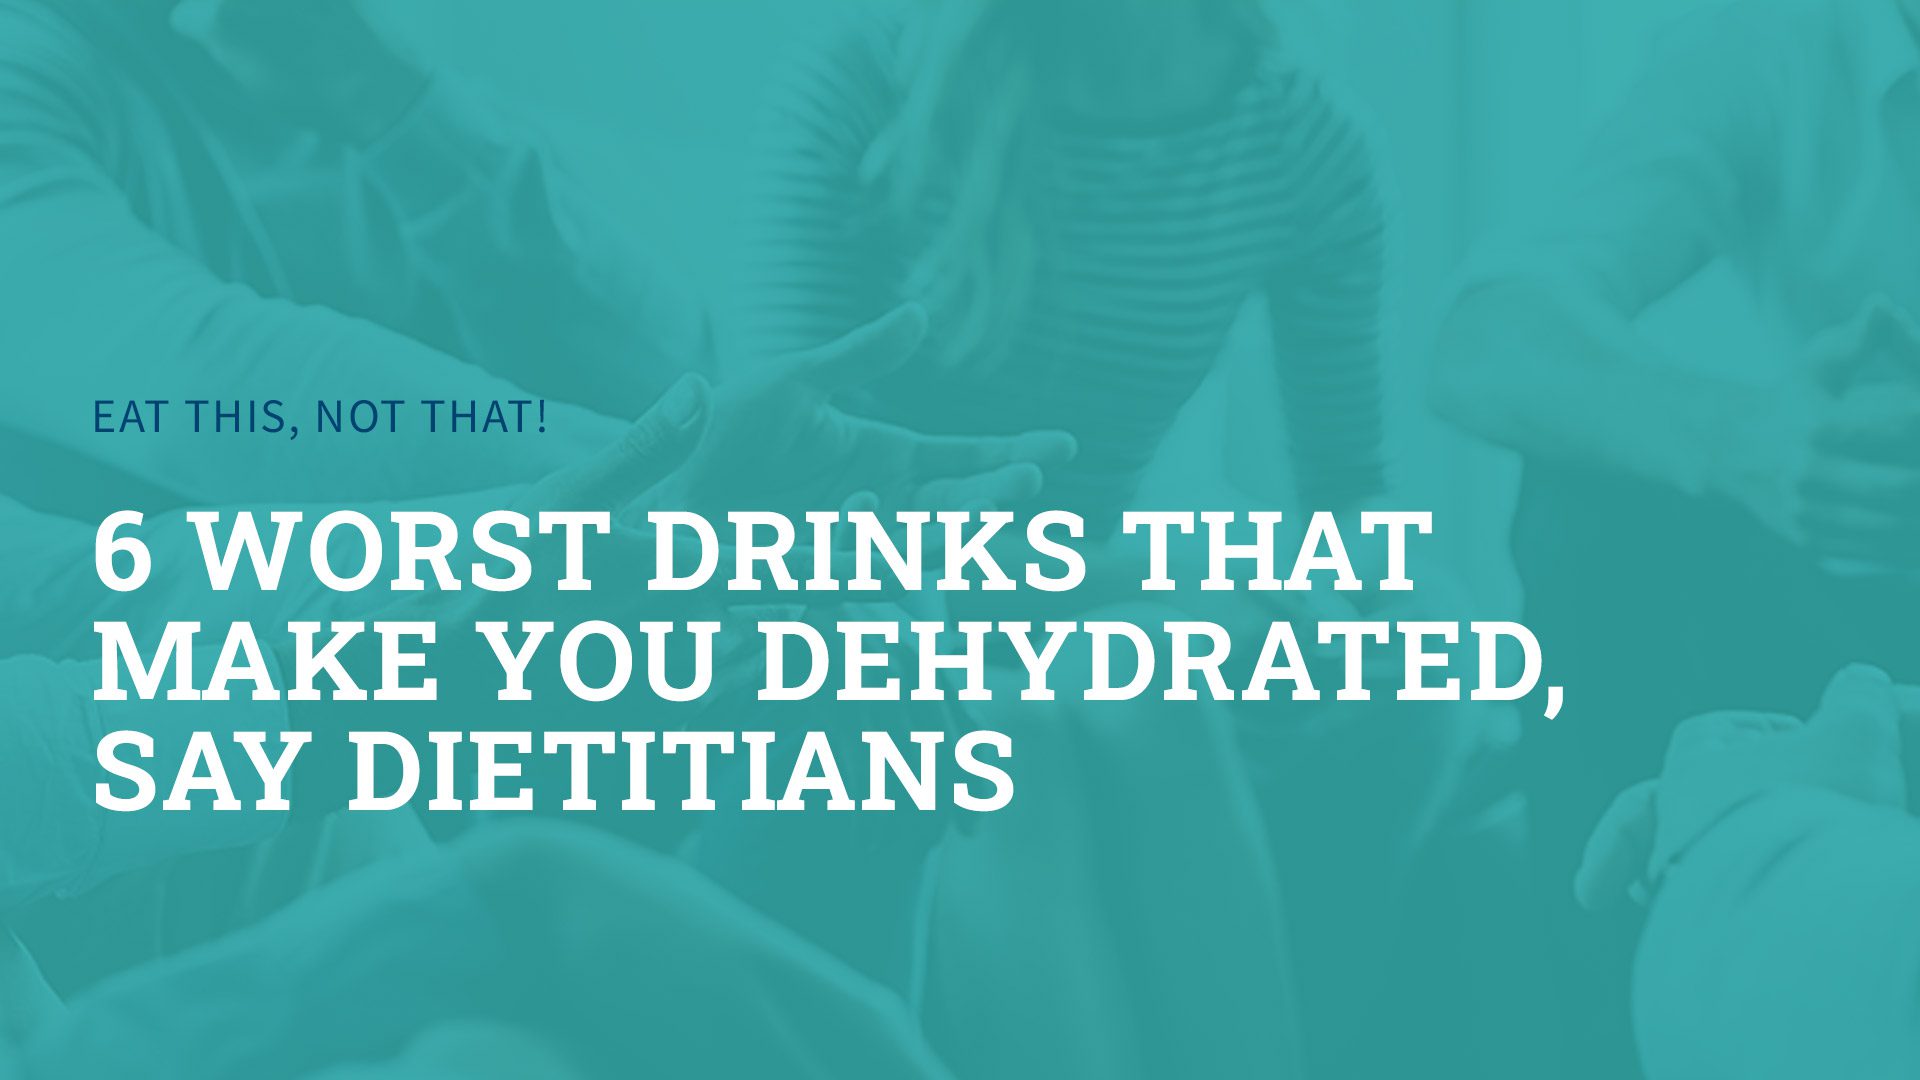 6 Worst Drinks That Make You Dehydrated, Say Dietitians